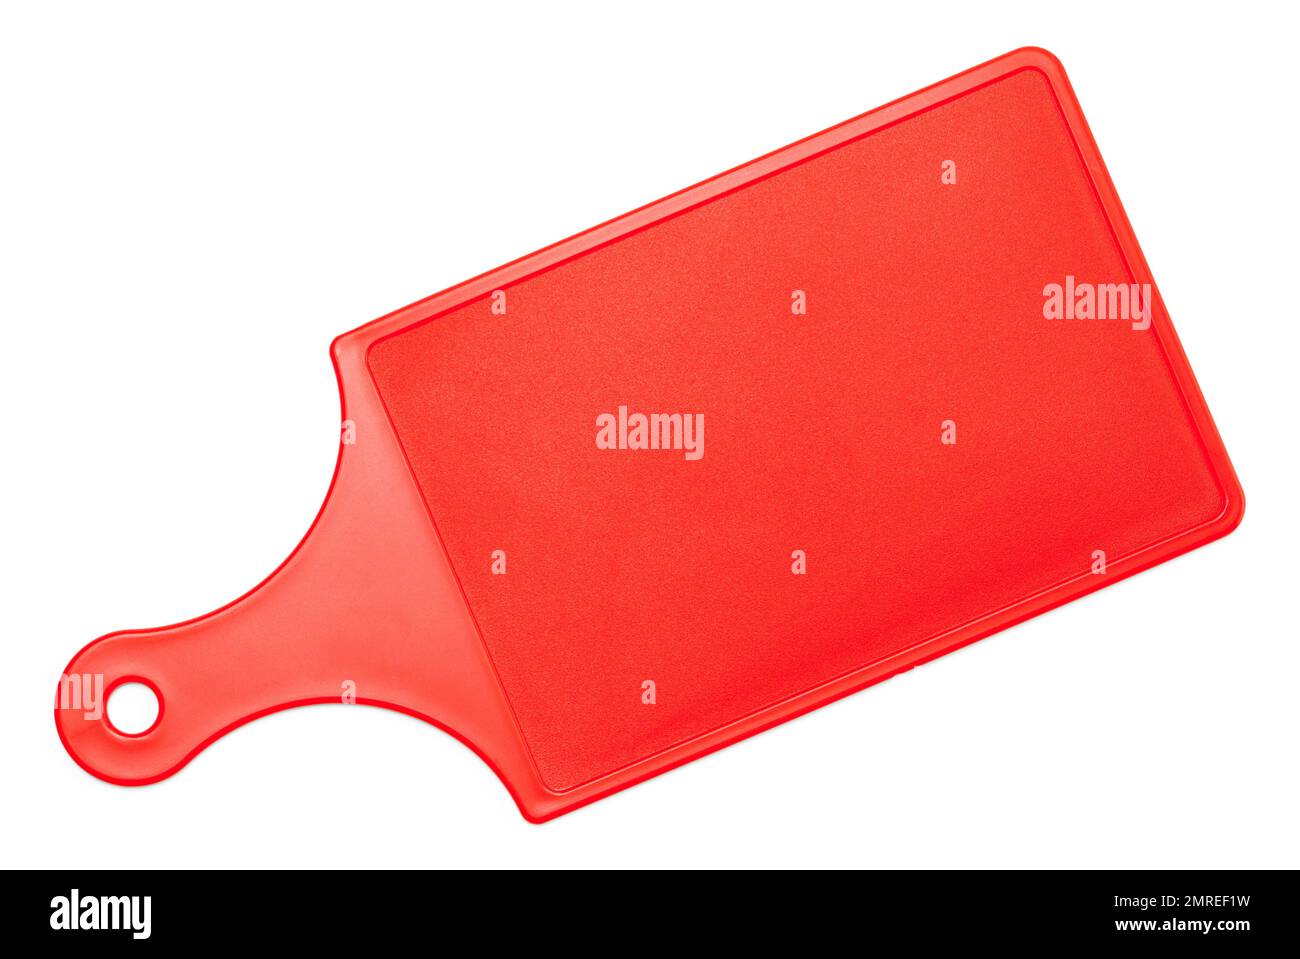 Small Red Plastic Cutting Board Top View Cut Out on White. Stock Photo